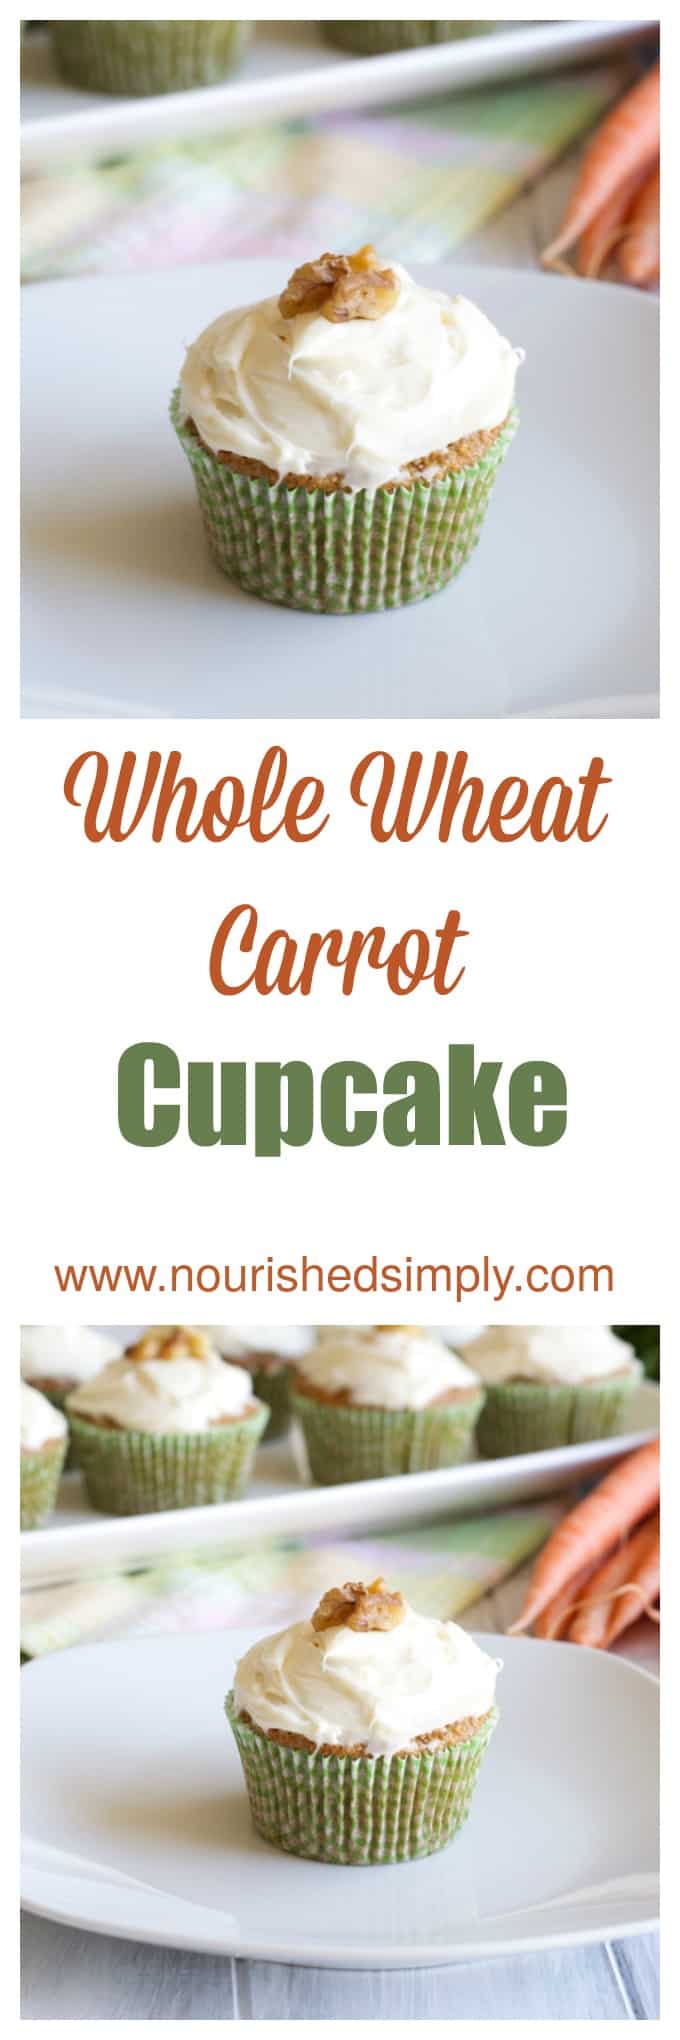 Whole Wheat Carrot Cupcakes made with whole wheat flour and other real ingredients.